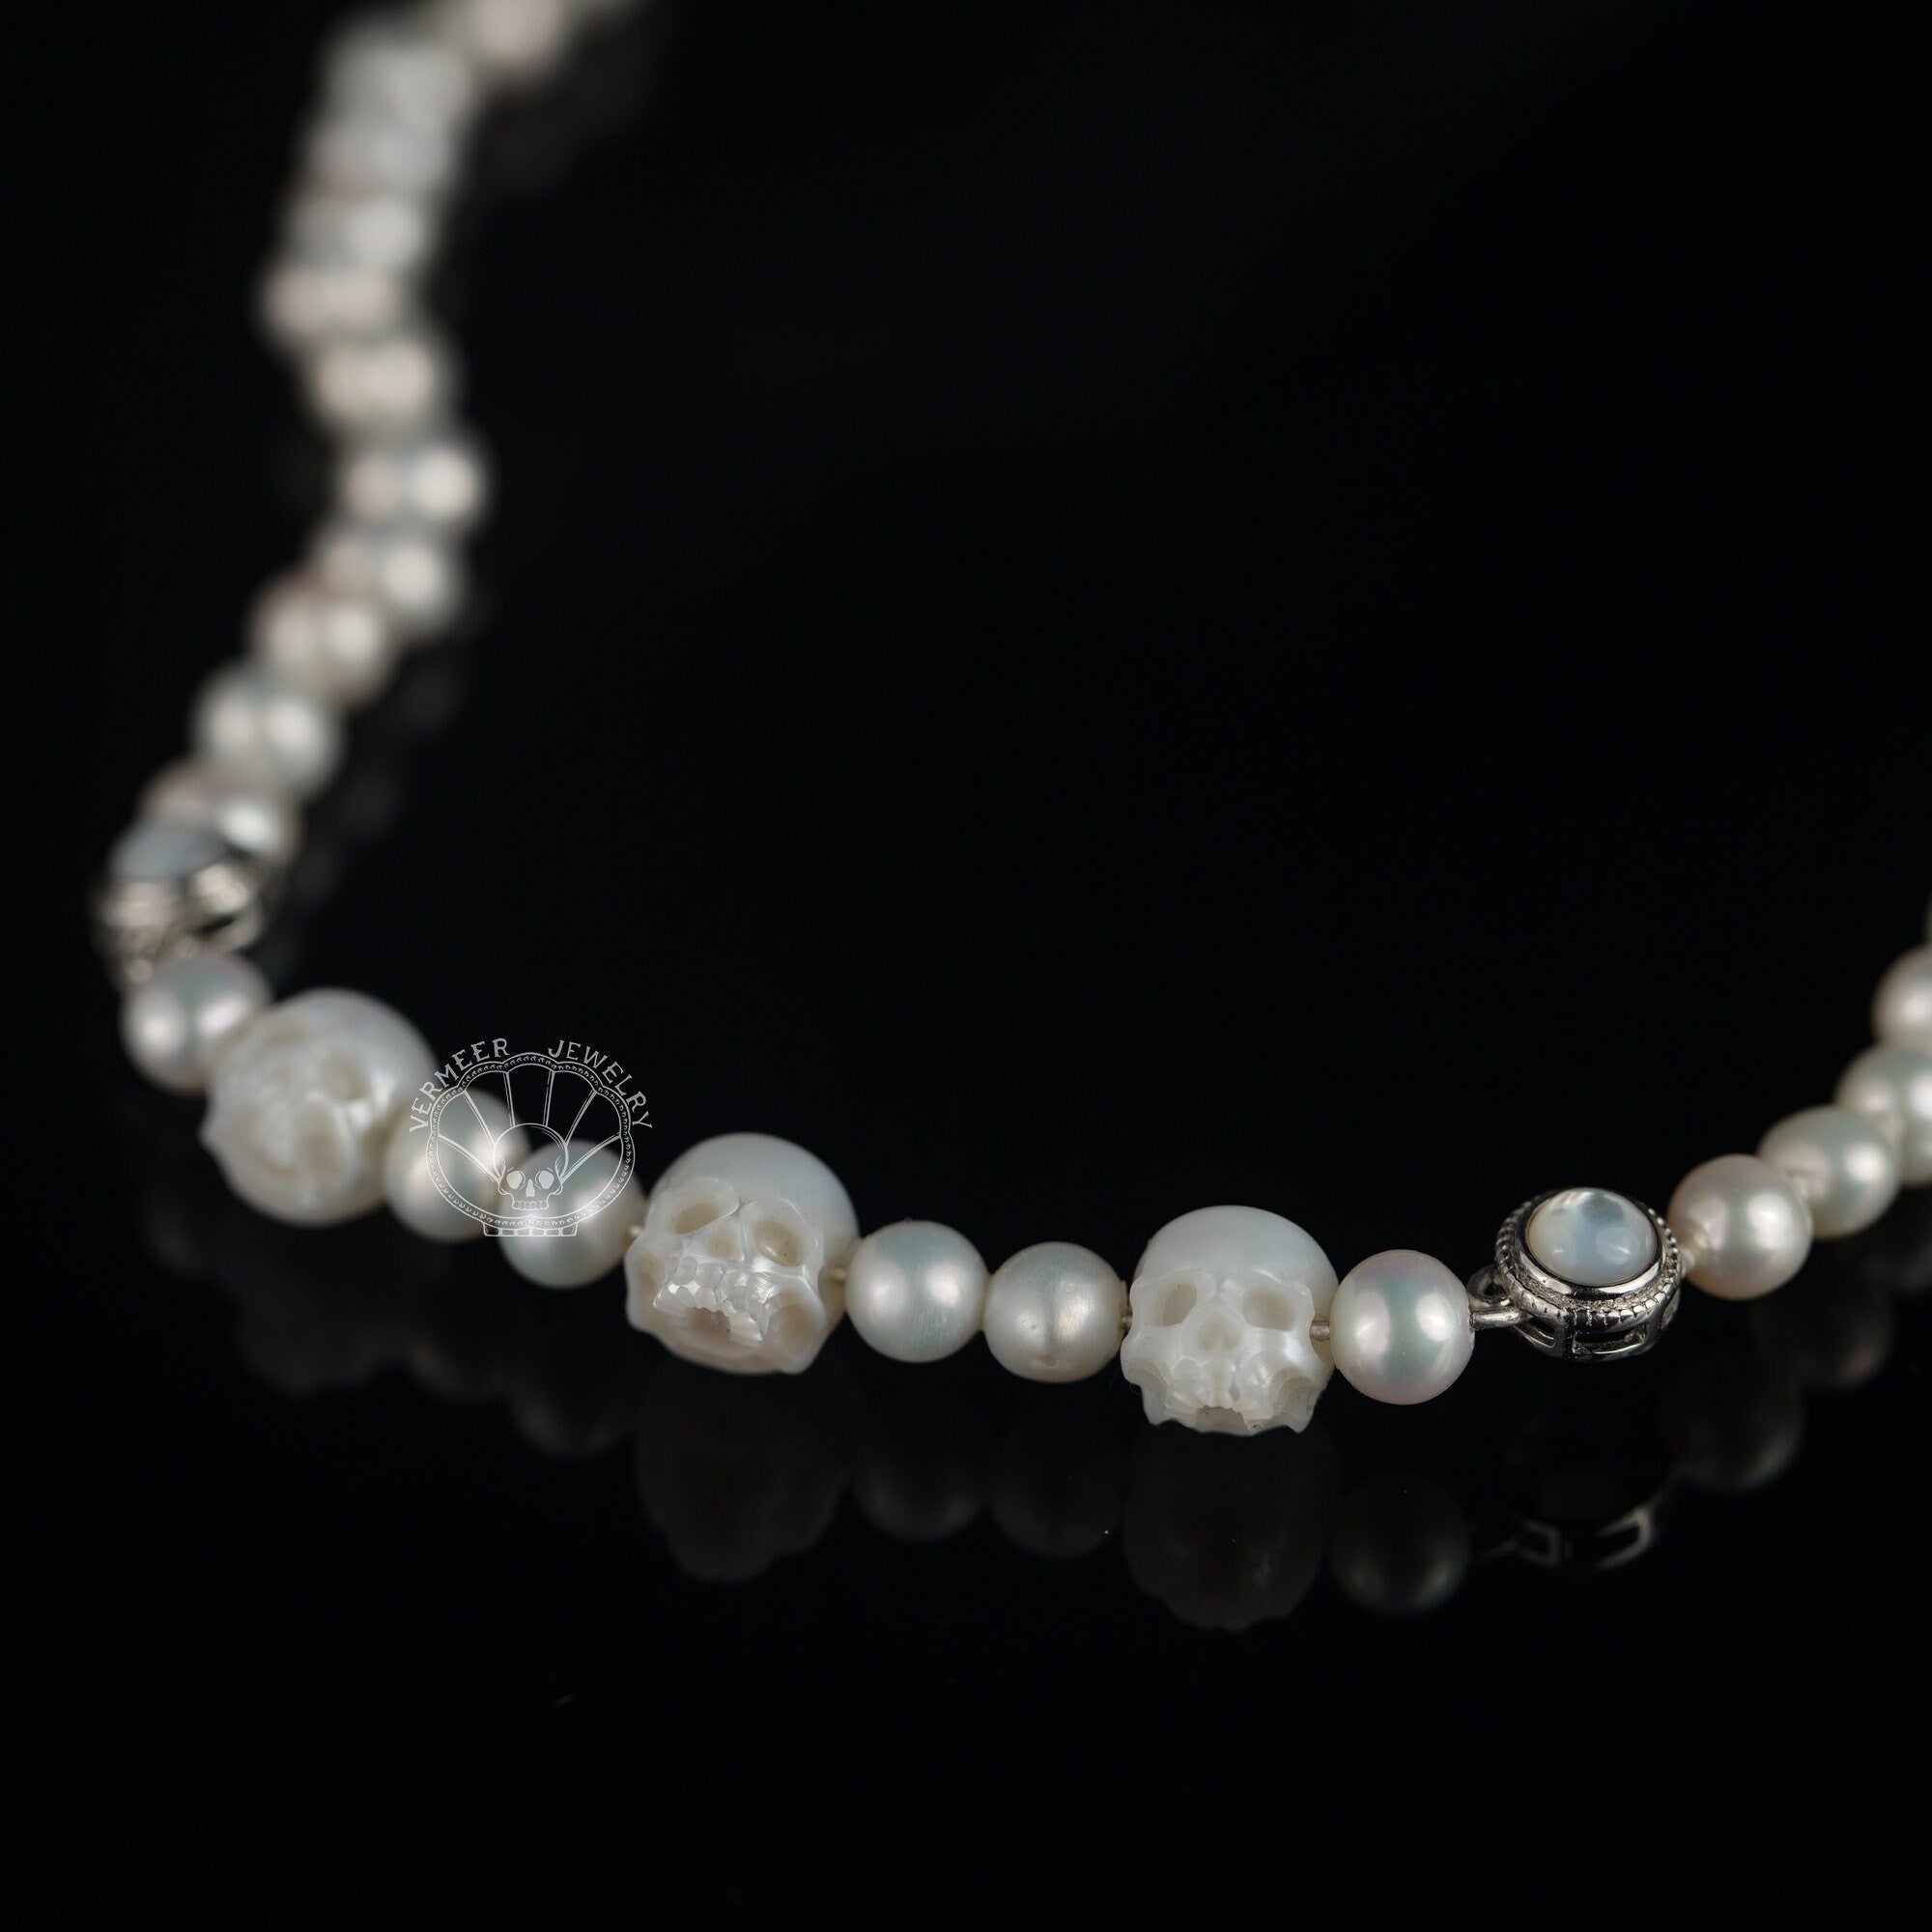 wedding necklace skull carved pearl necklace gothic freshwater Pearl skull jewelry for Bridal